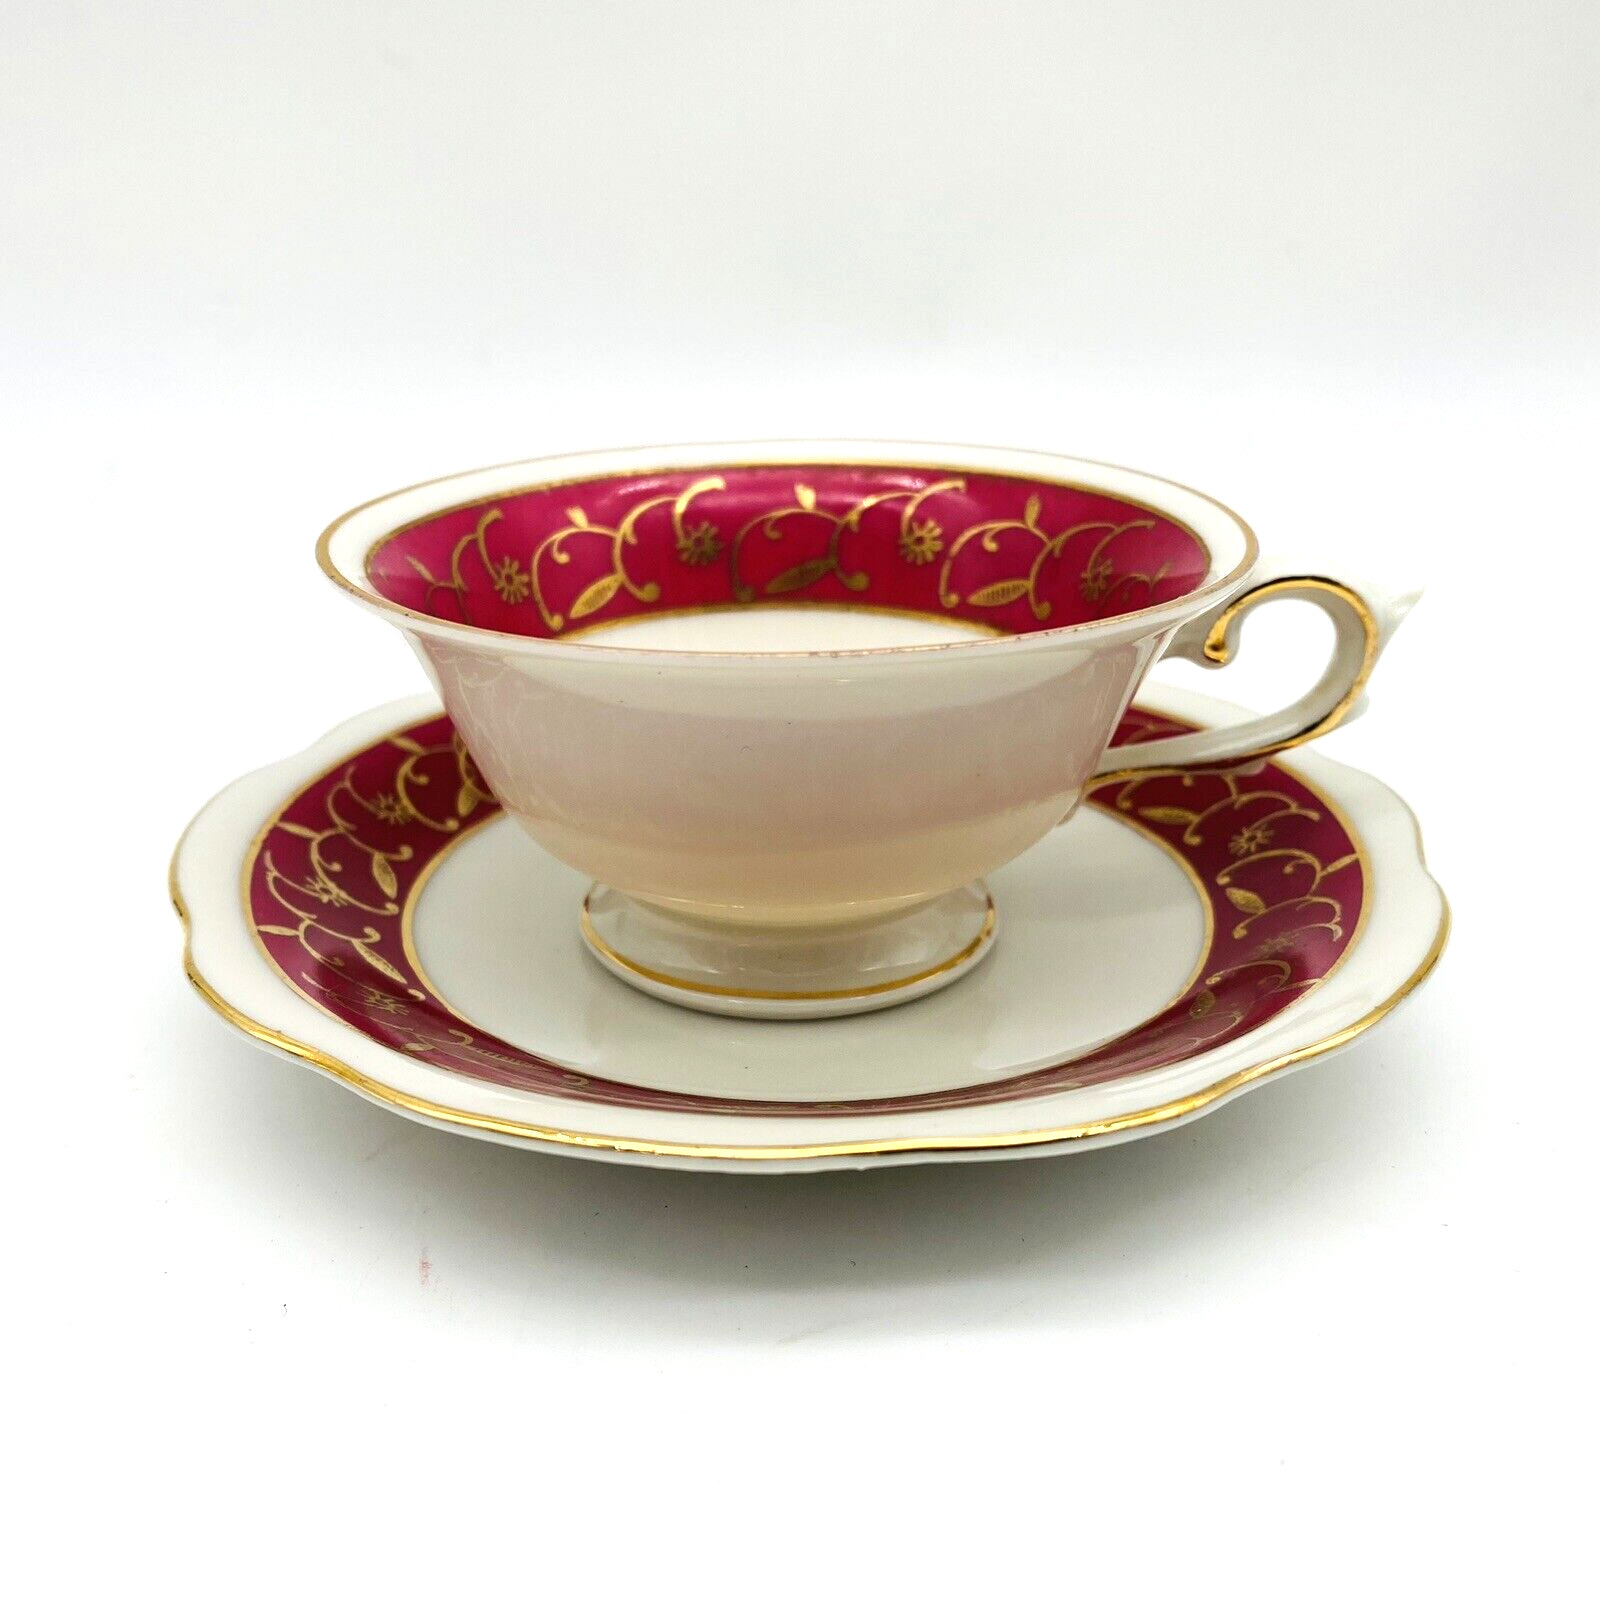 Porzellan Imperial Germany Footed Demitasse Tea Cup Saucer Pink Gold Trim